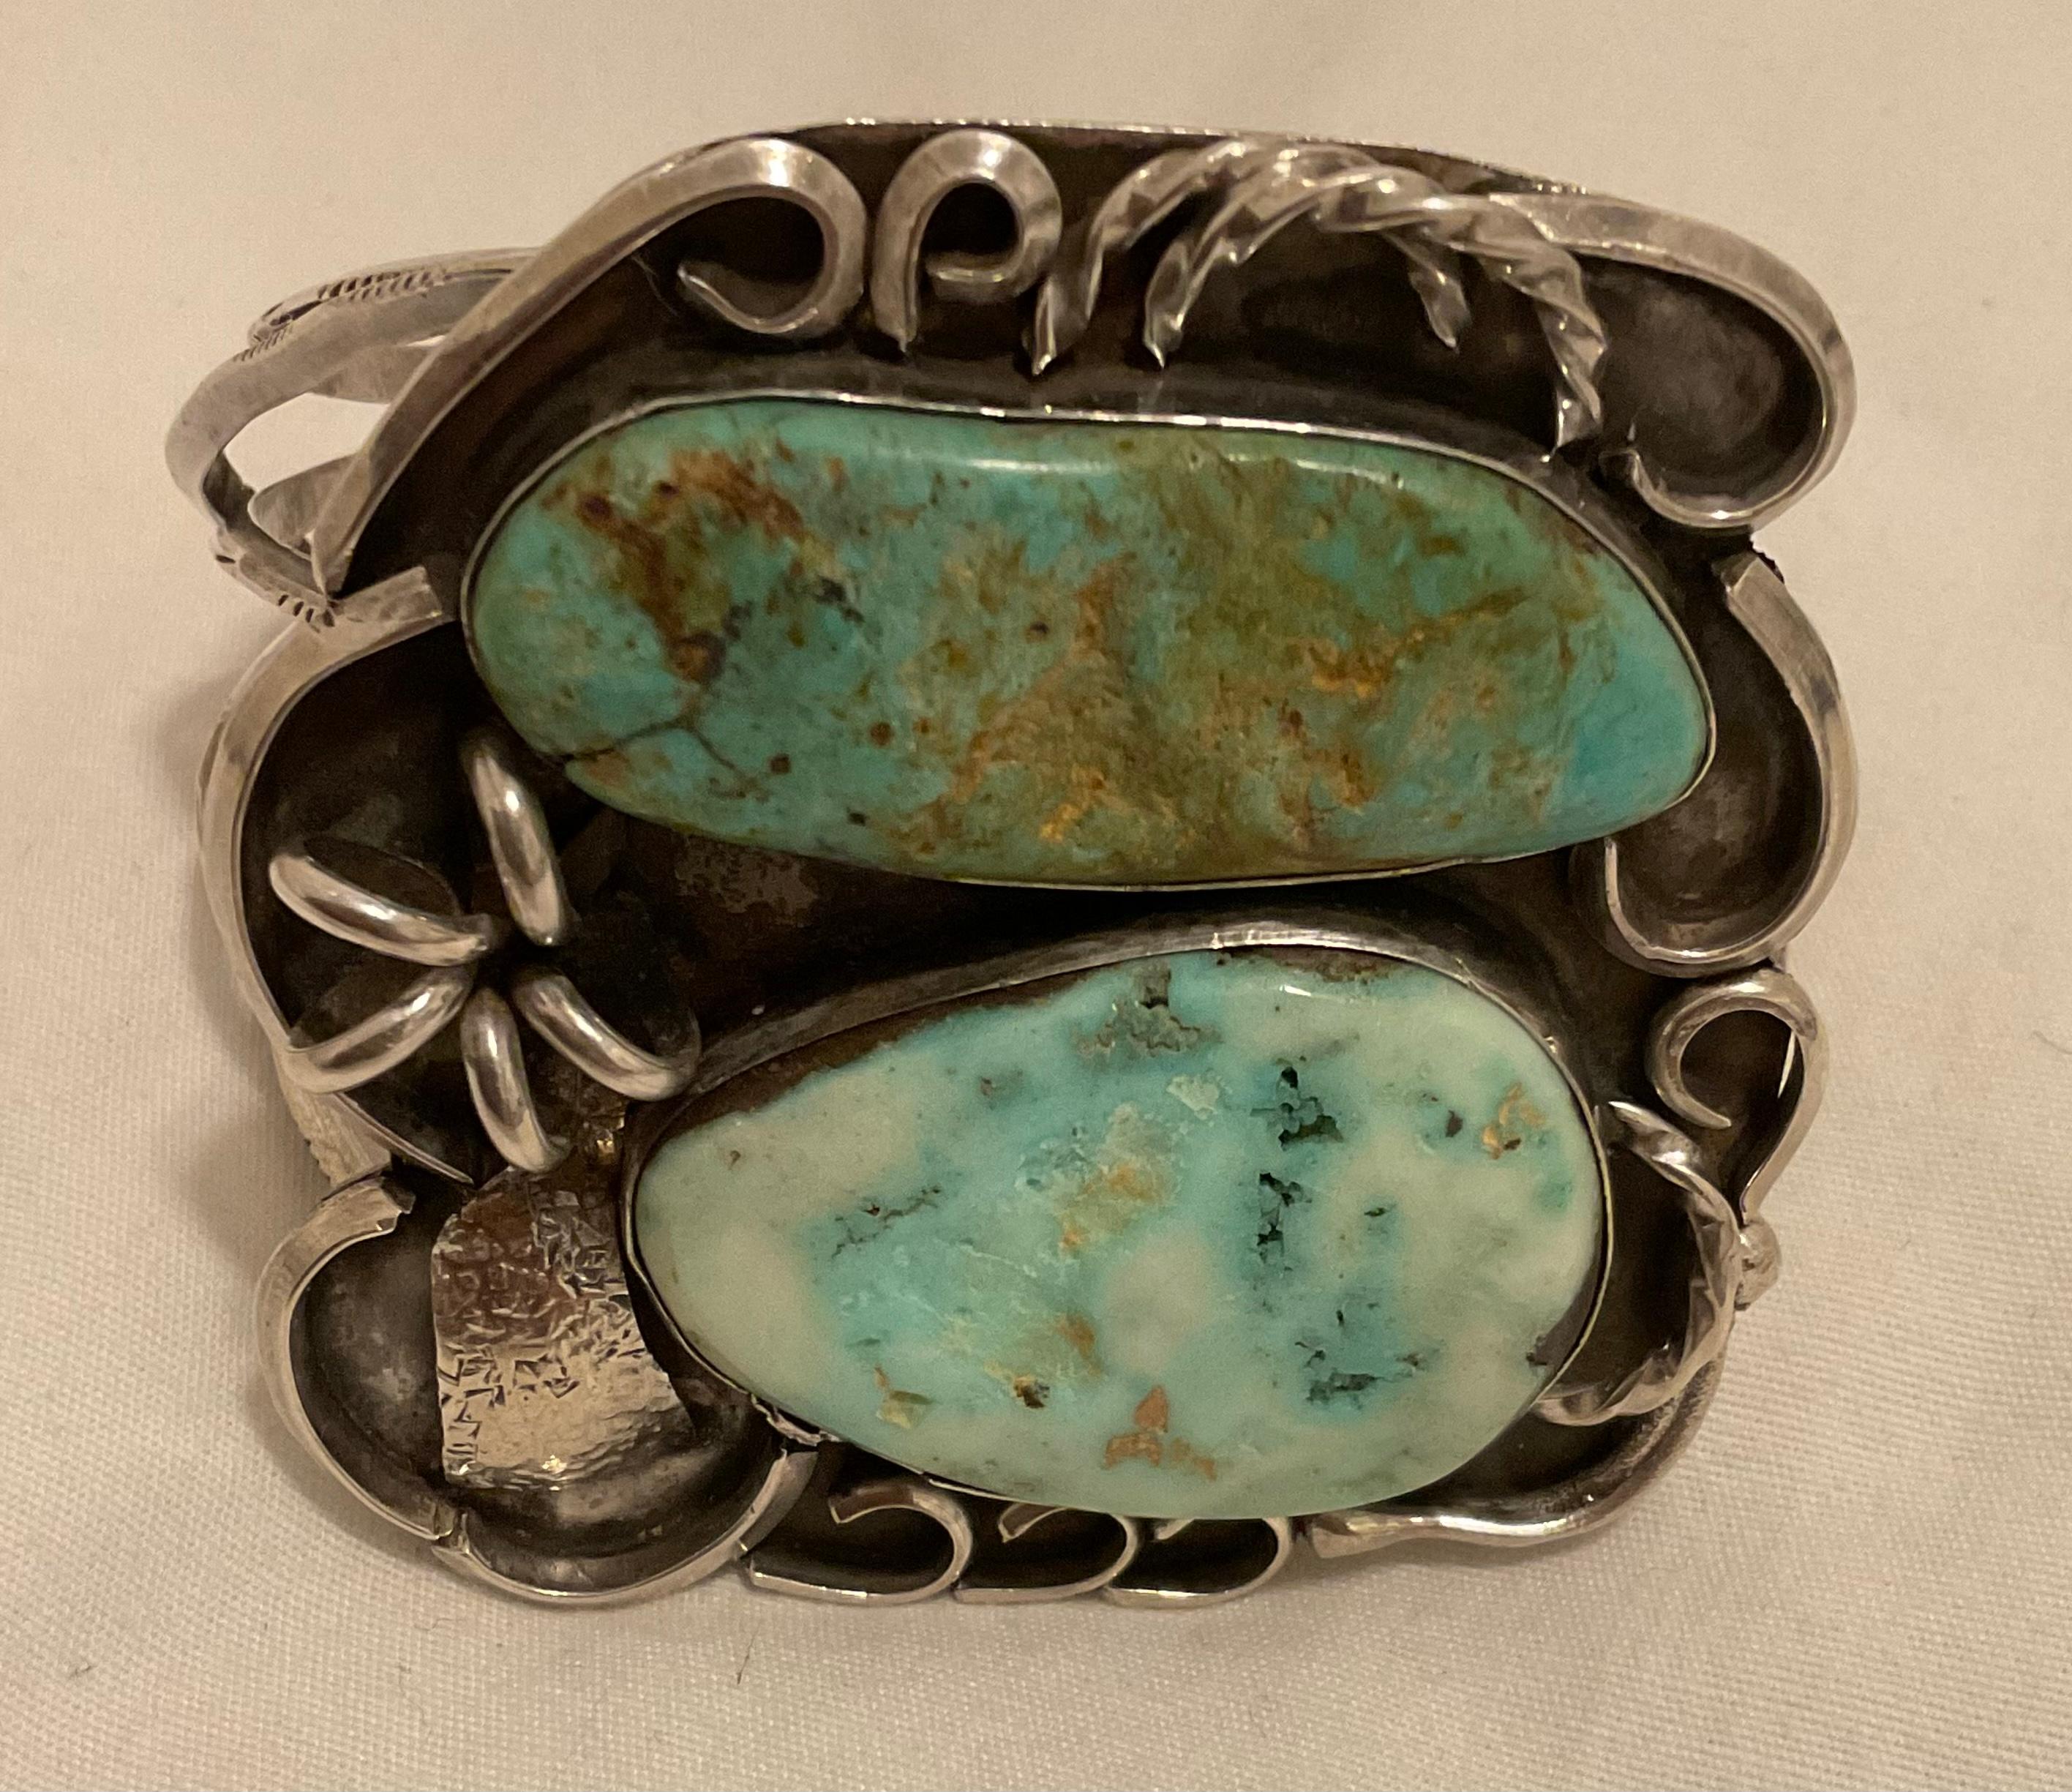 This extremely rare cuff is one of the oldest I've offered. It dates to the 1920s, as per the previous owner, and is hand stamped J.W. It is sure to please any Native American jewelry aficionado. The Bird's Eye Turquoise is white in spots and the